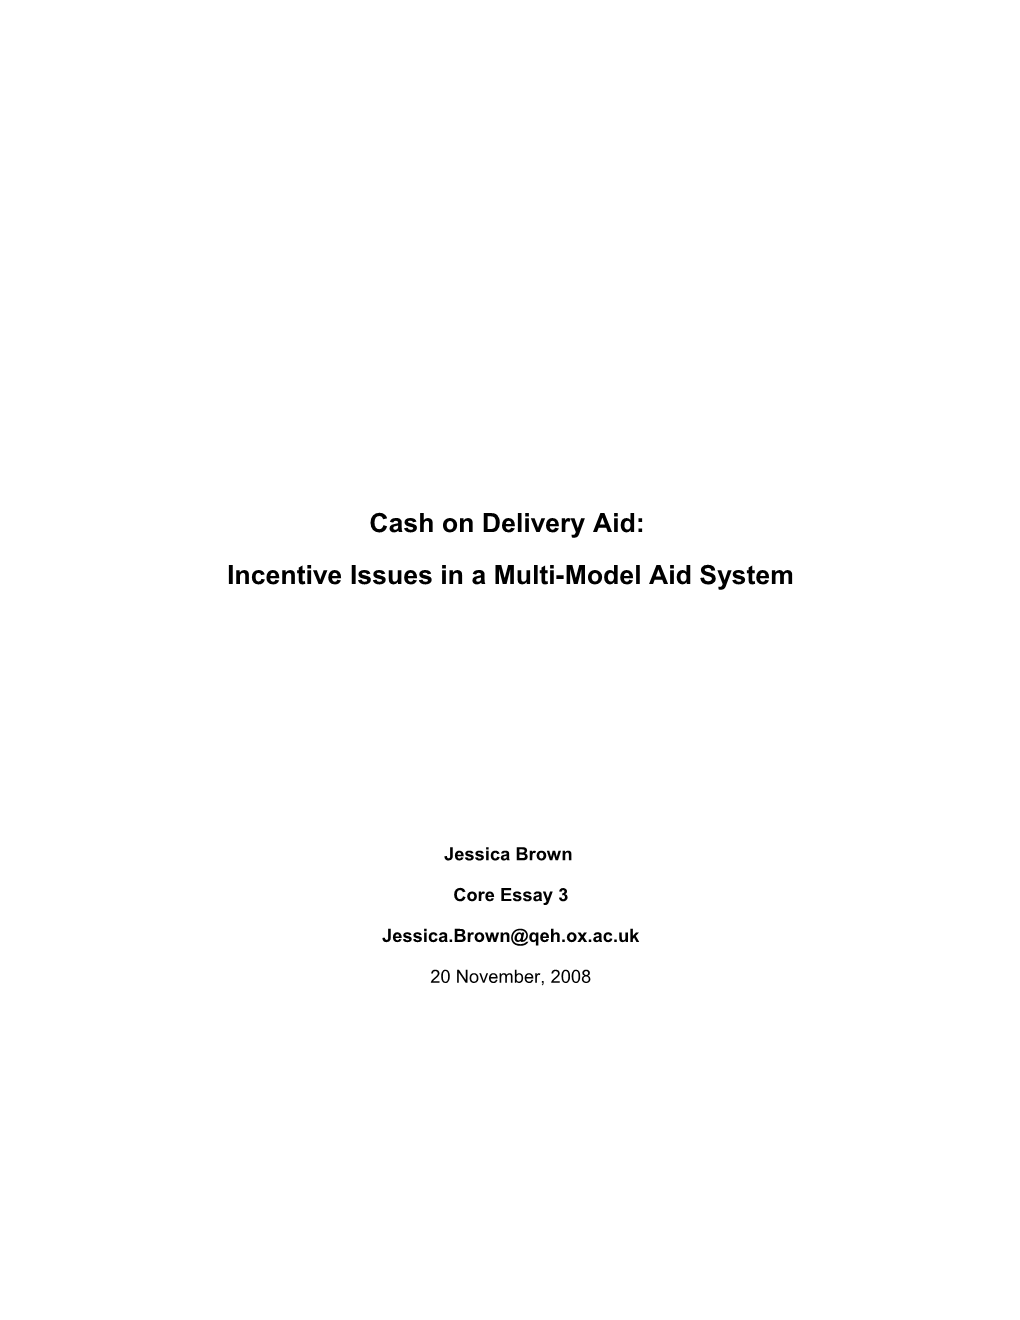 Incentive Issues in a Multi-Model Aid System